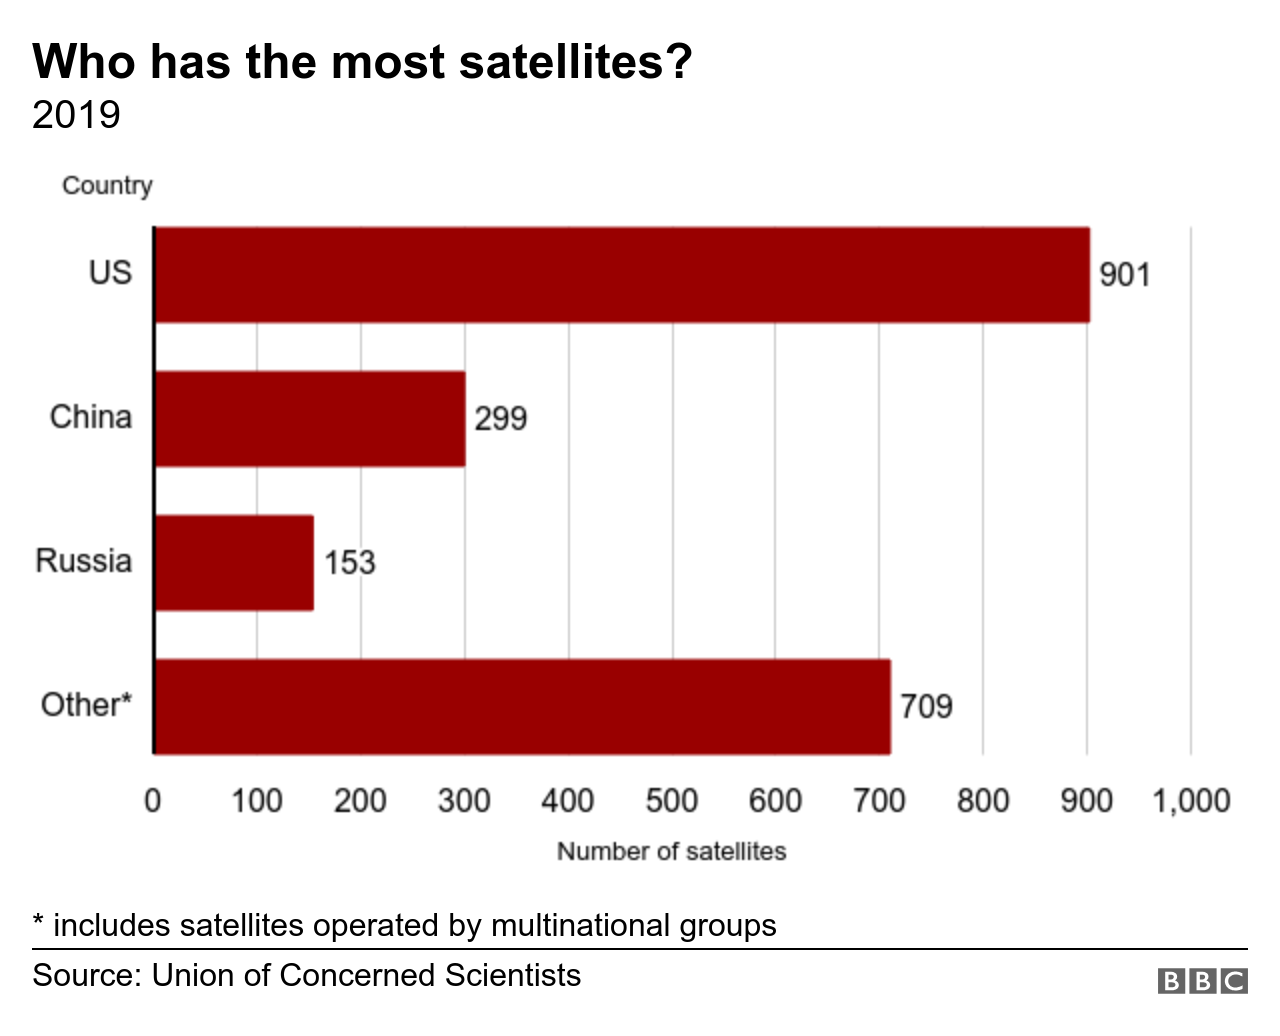 Bar chart of satellite numbers